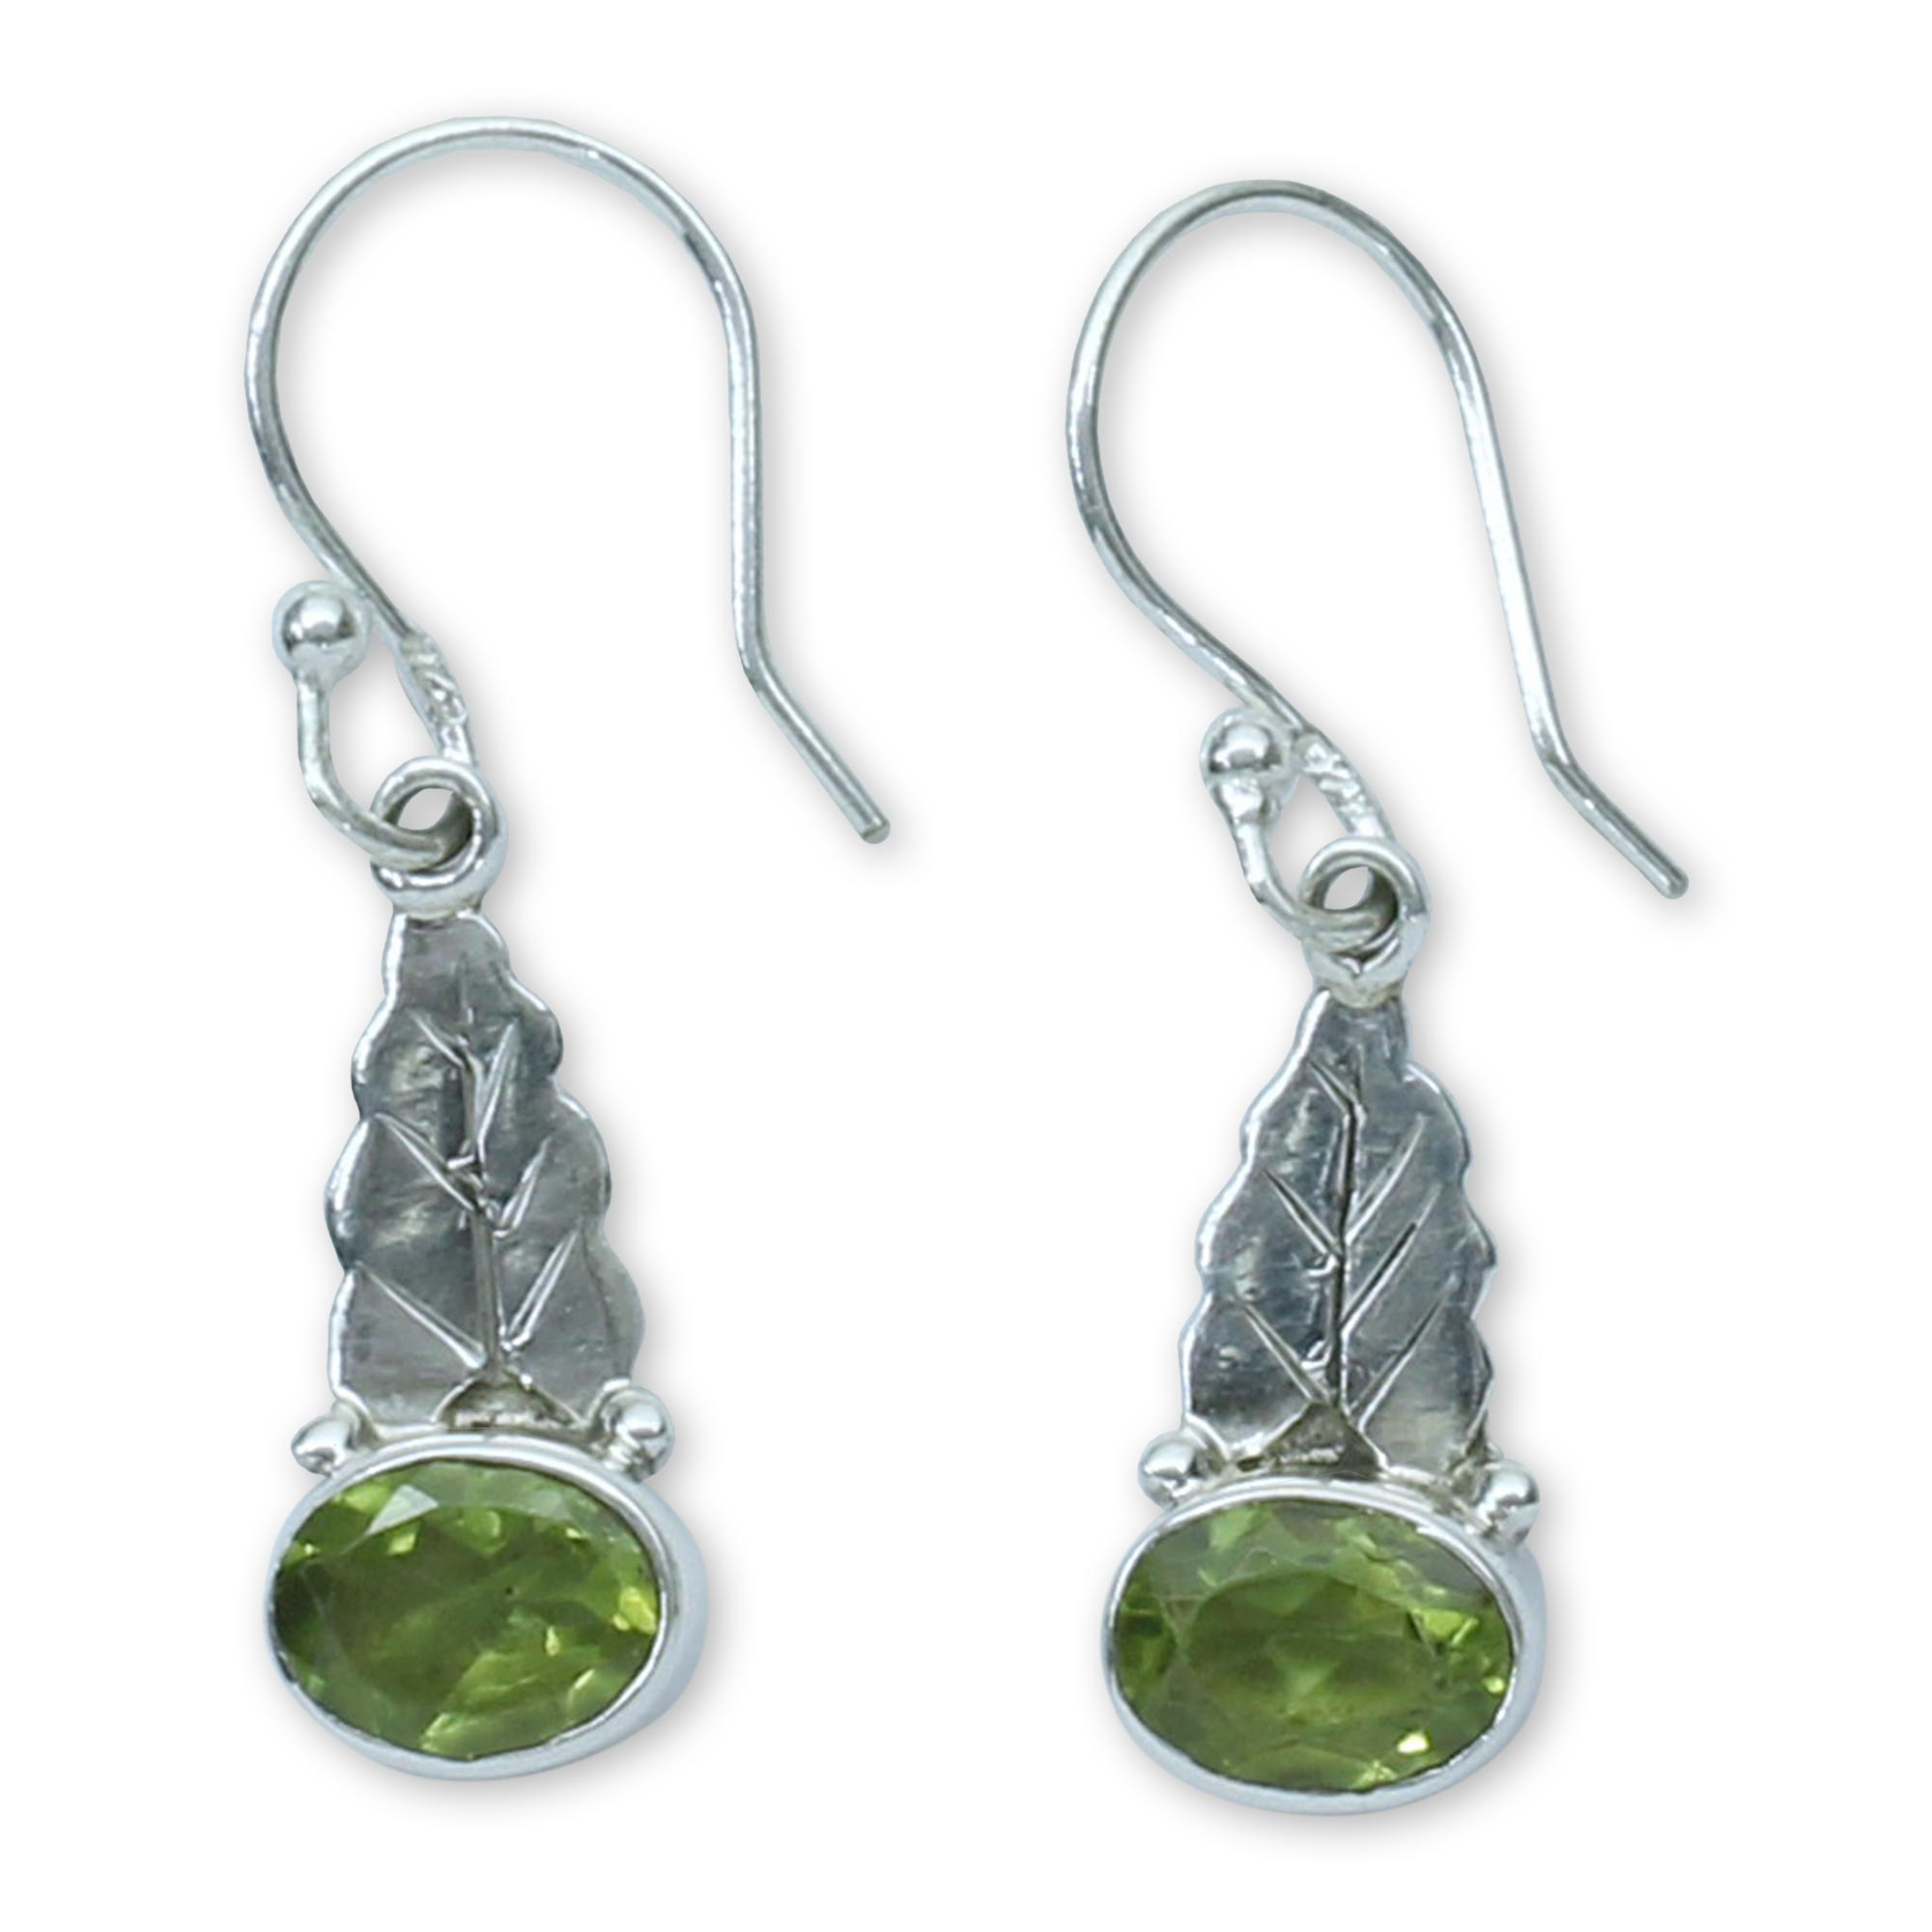 Peridot and Sterling Silver Artisan Crafted Earrings - Green Leaves ...